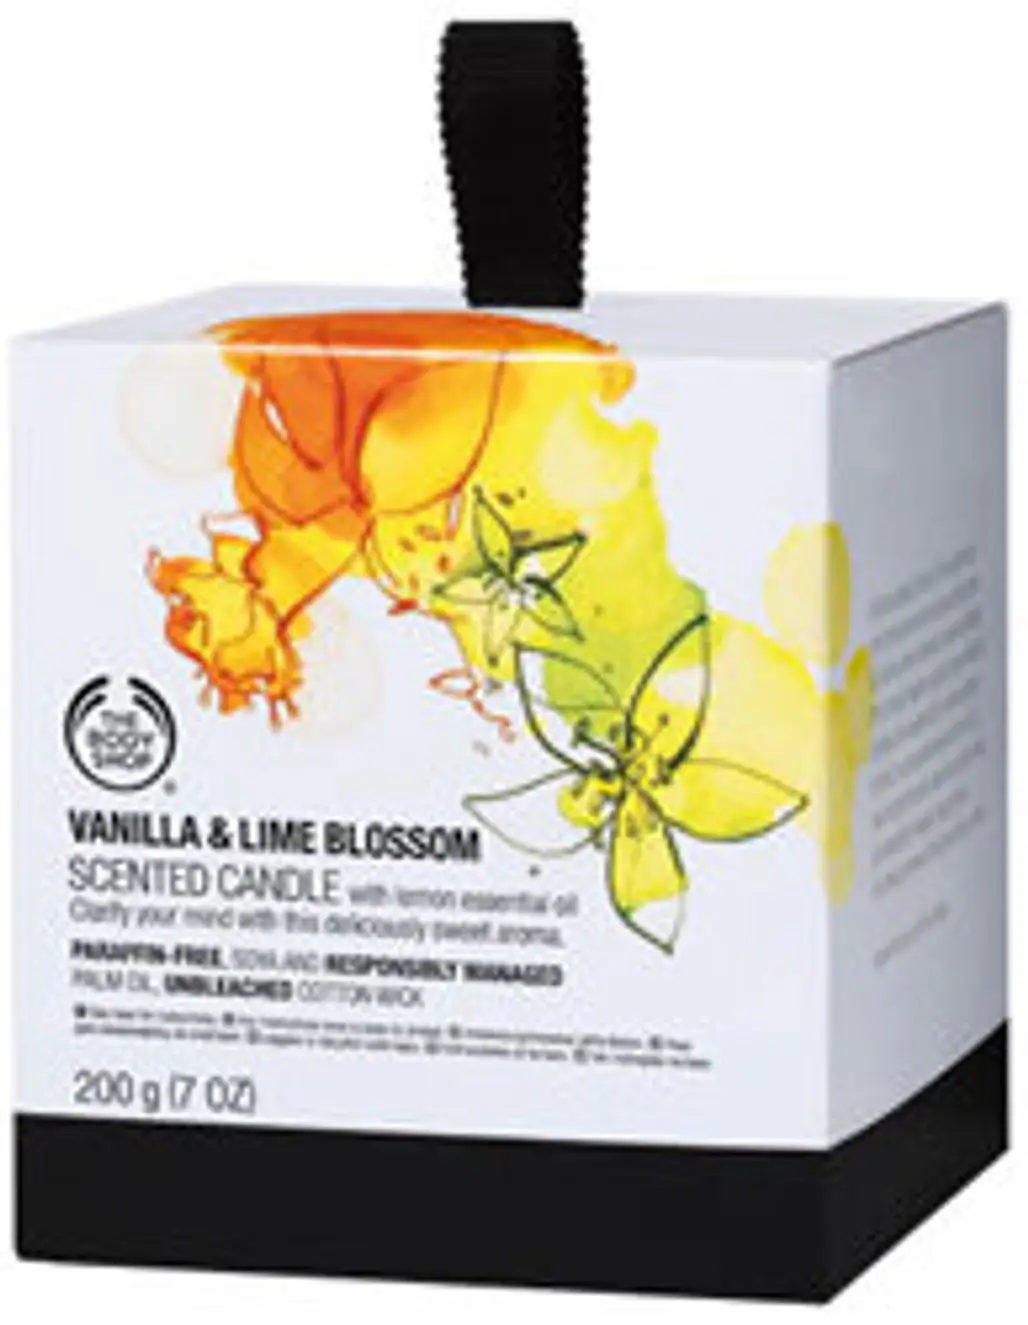 The Body Shop Vanilla and Lime Blossom Scented Candle